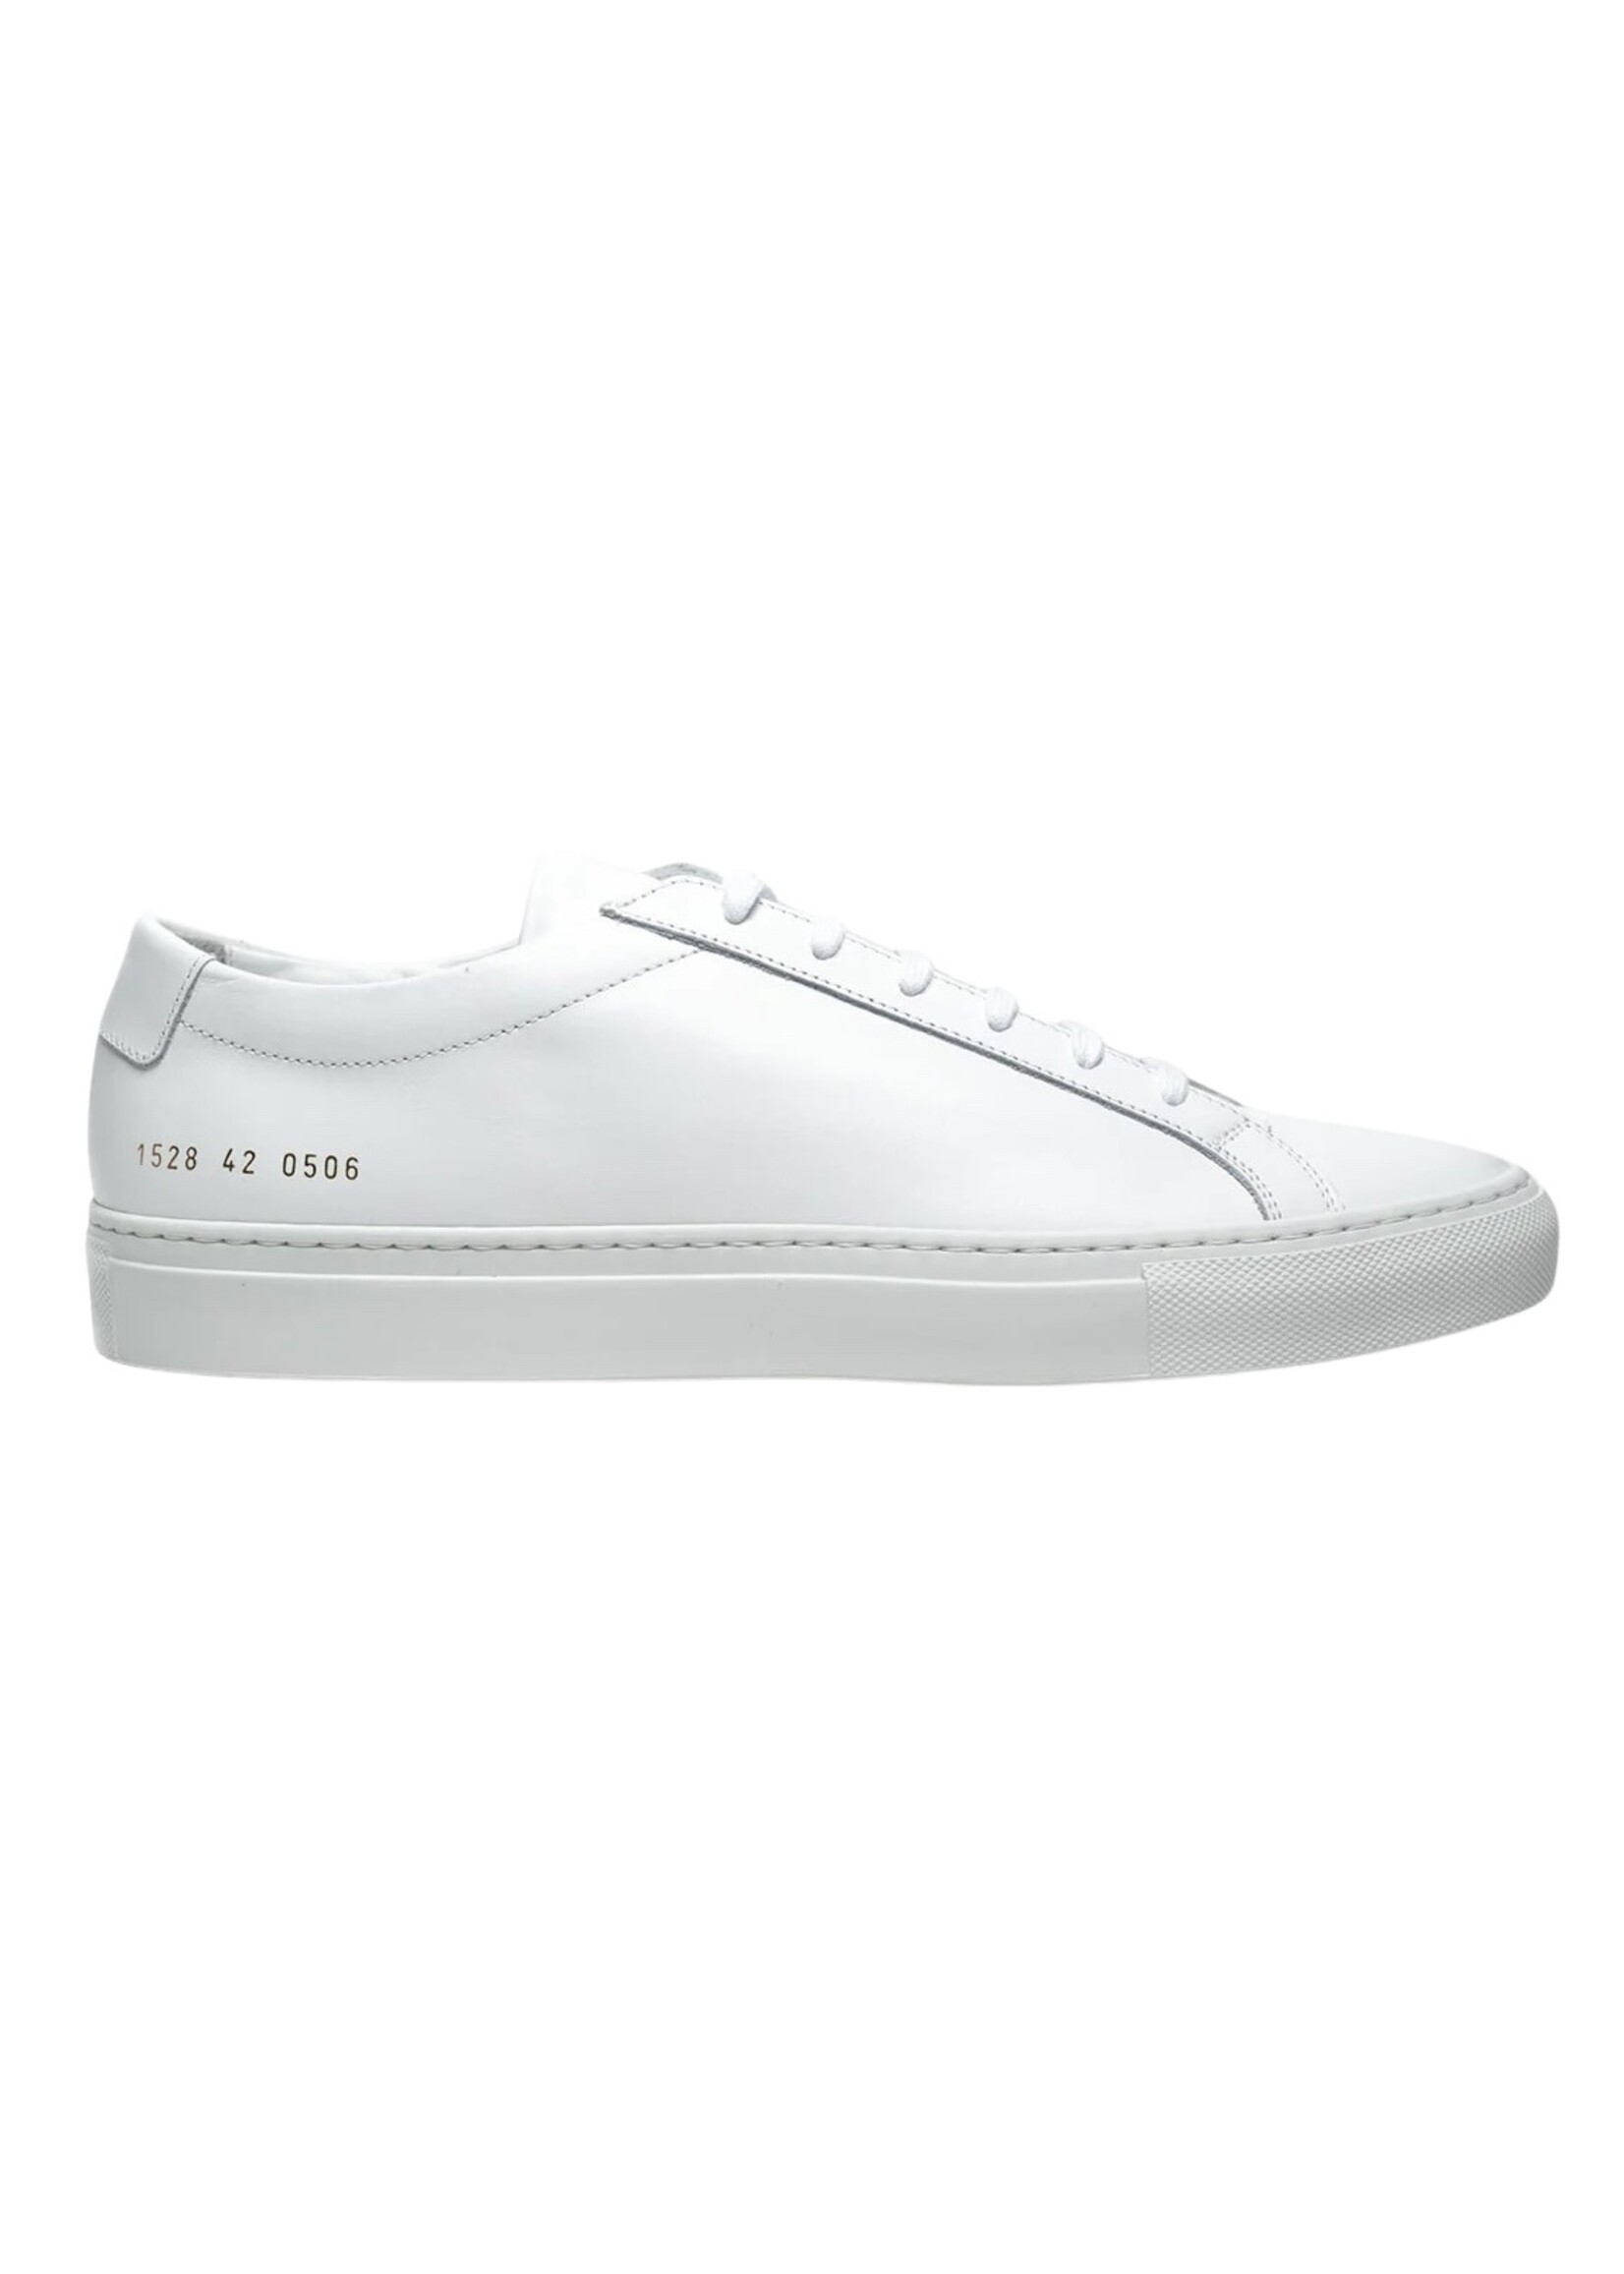 COMMON PROJECTS ACHILLES LOW SNEAKER